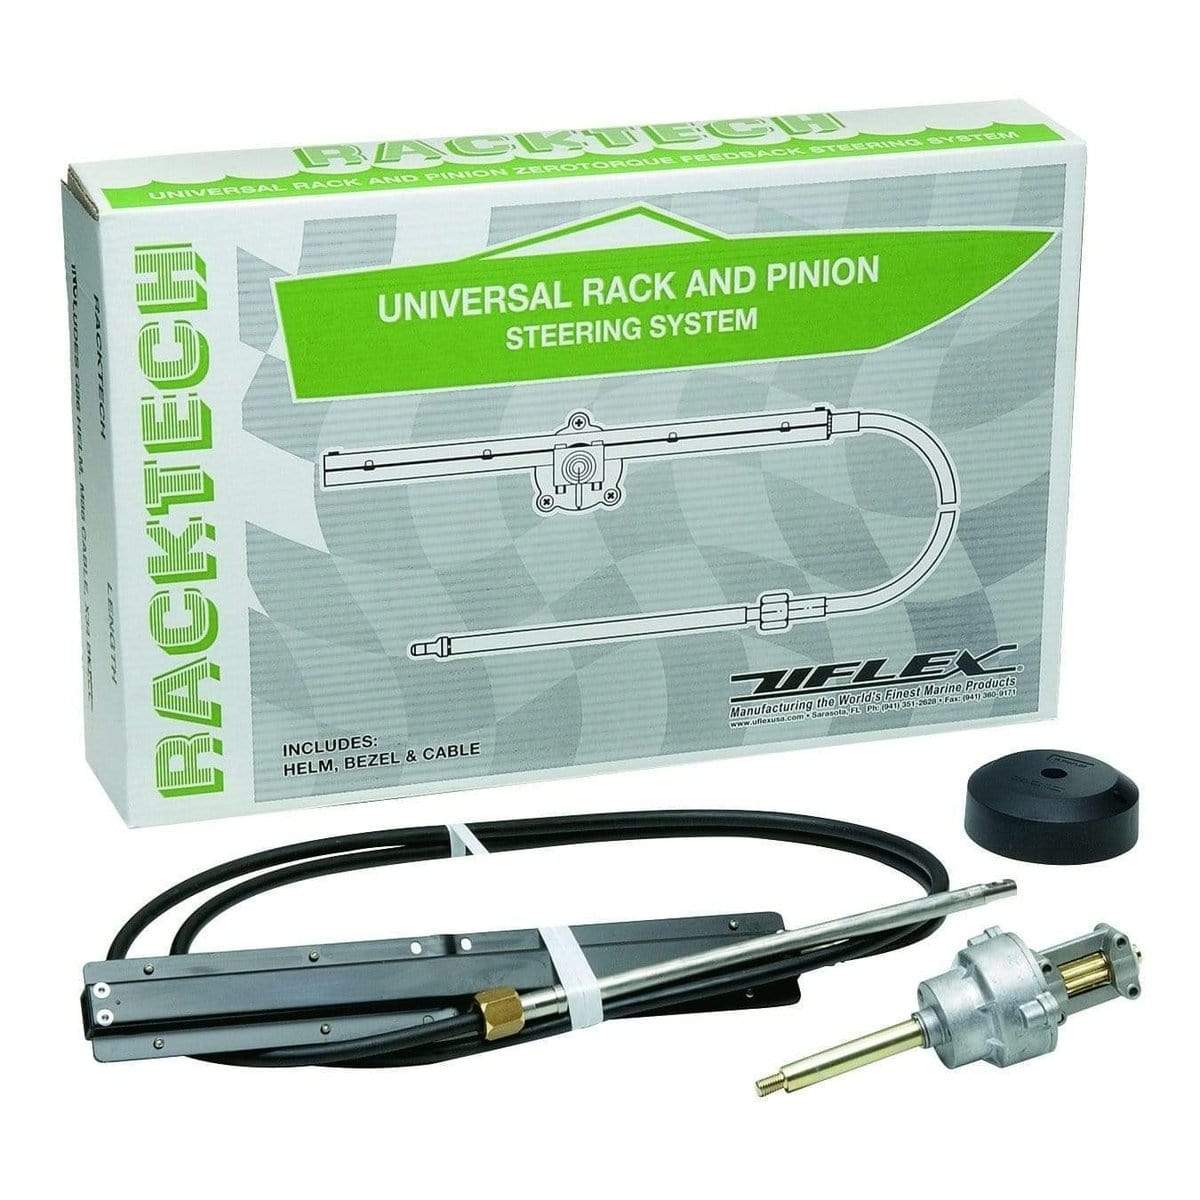 Uflex USA Qualifies for Free Shipping Uflex Rack and Pinion Steering Kit with 20' Cable #RACKTECH20